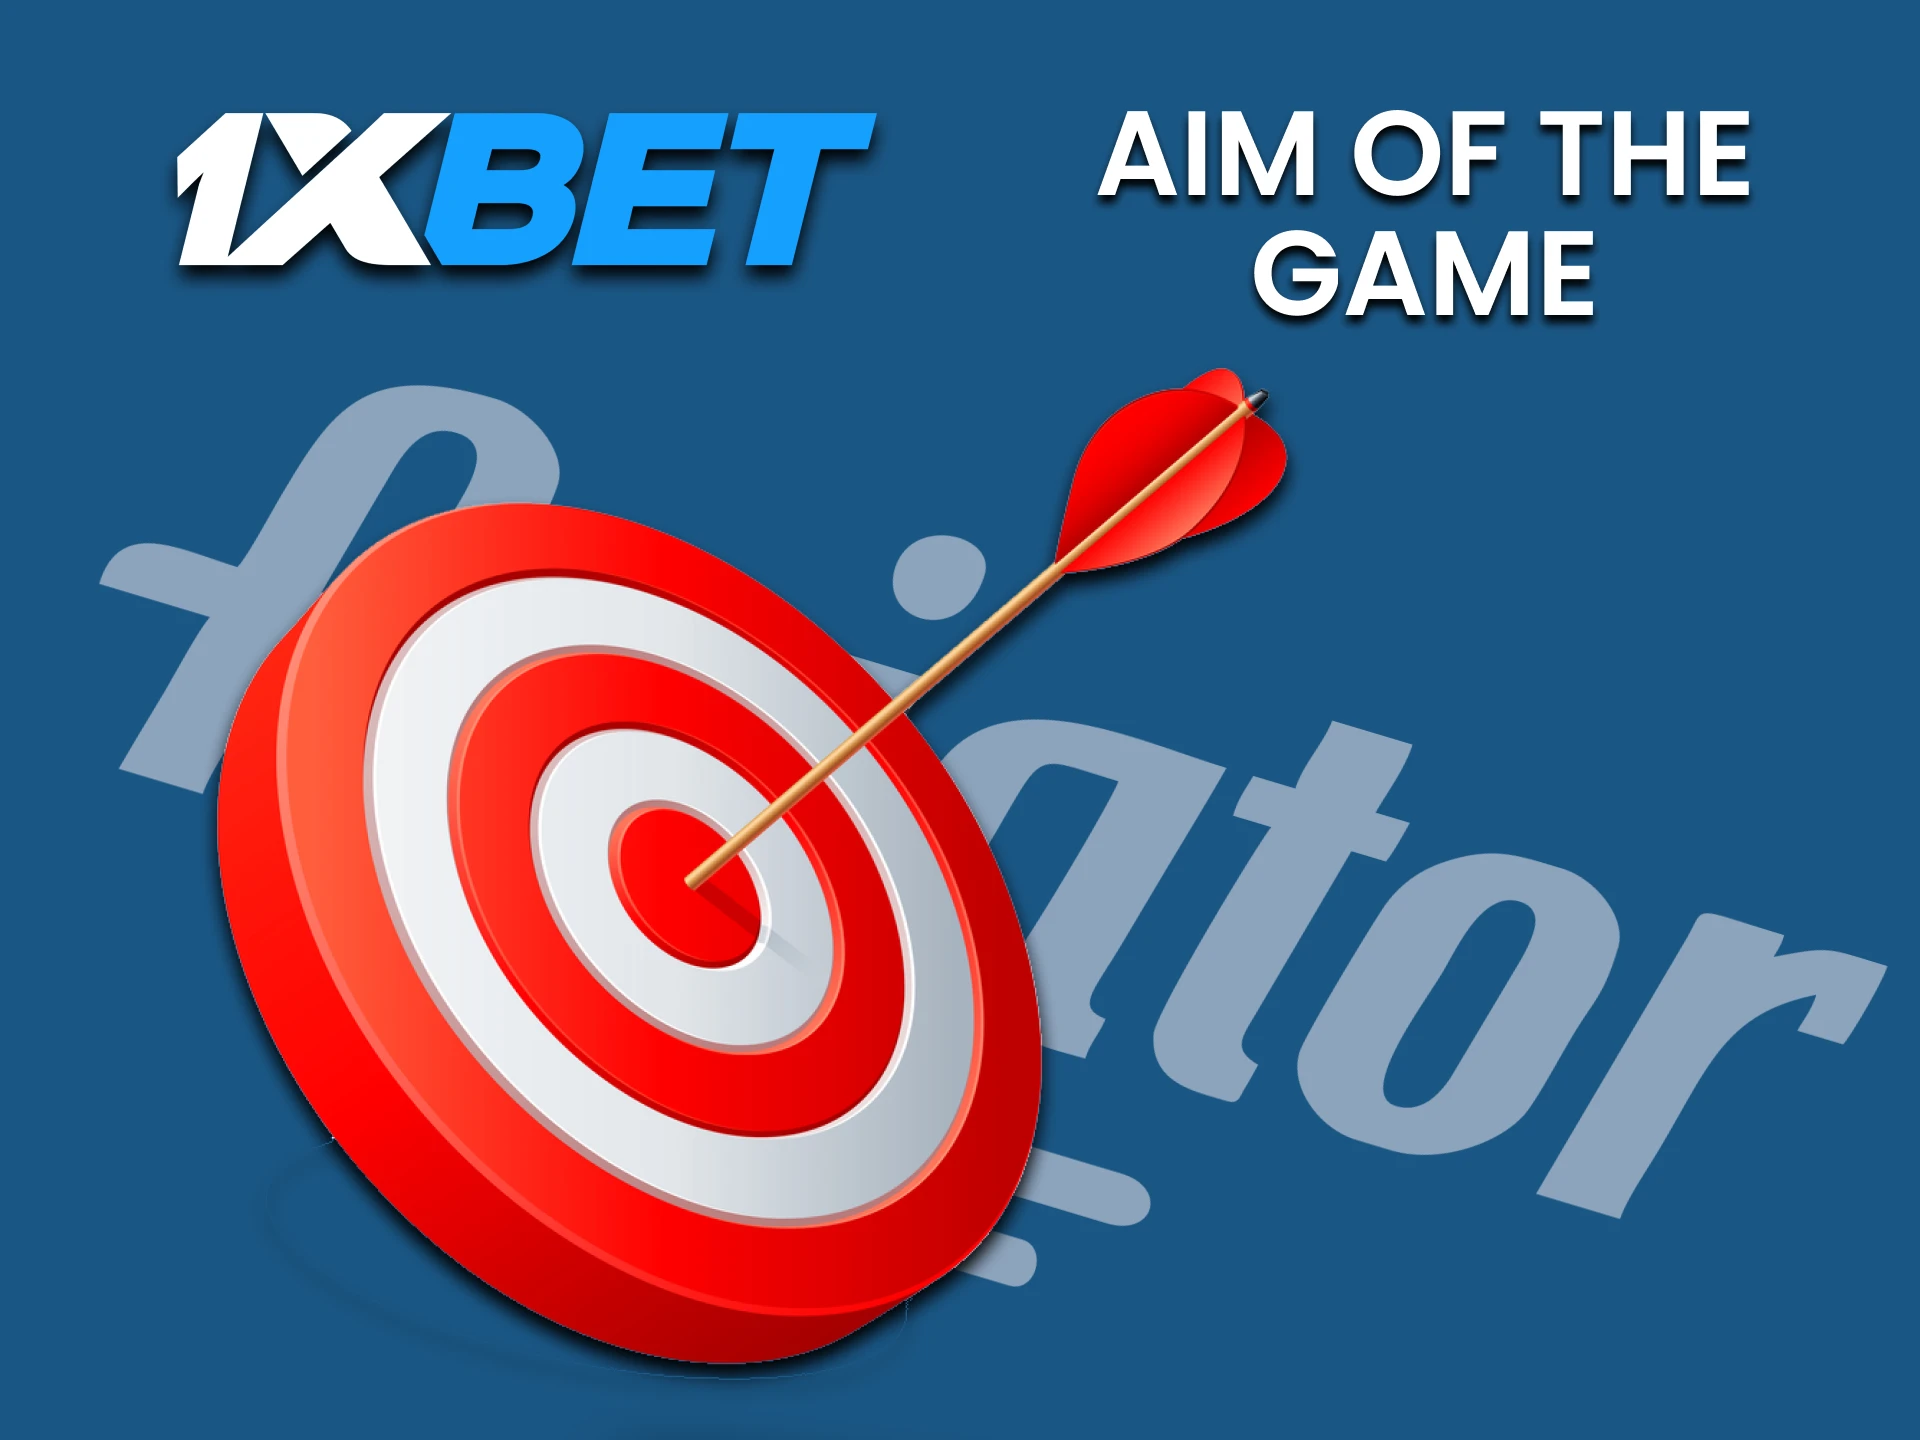 Find out what the goal of the Aviator game is on the 1xbet website.